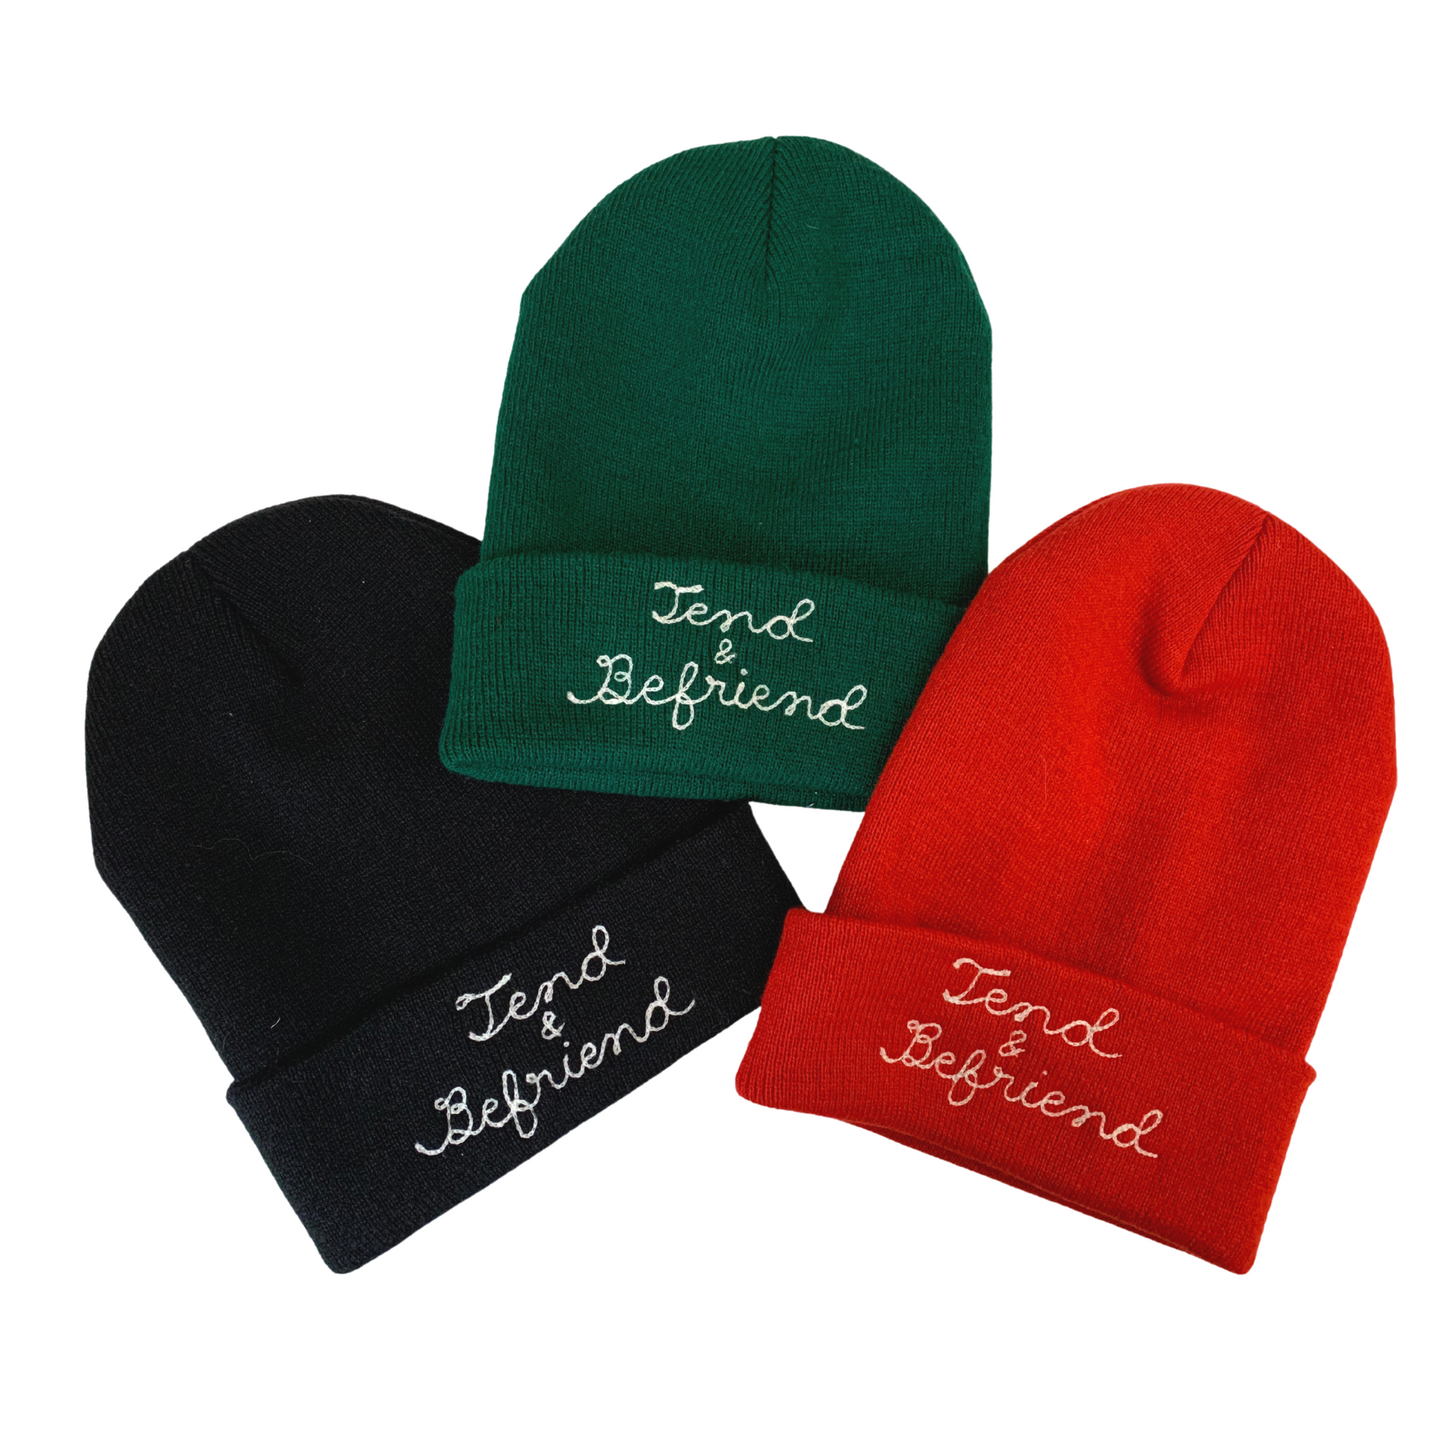 Group of black, green, and red knit beanies with cursive lettering embroidered with chainstitch embroidery.